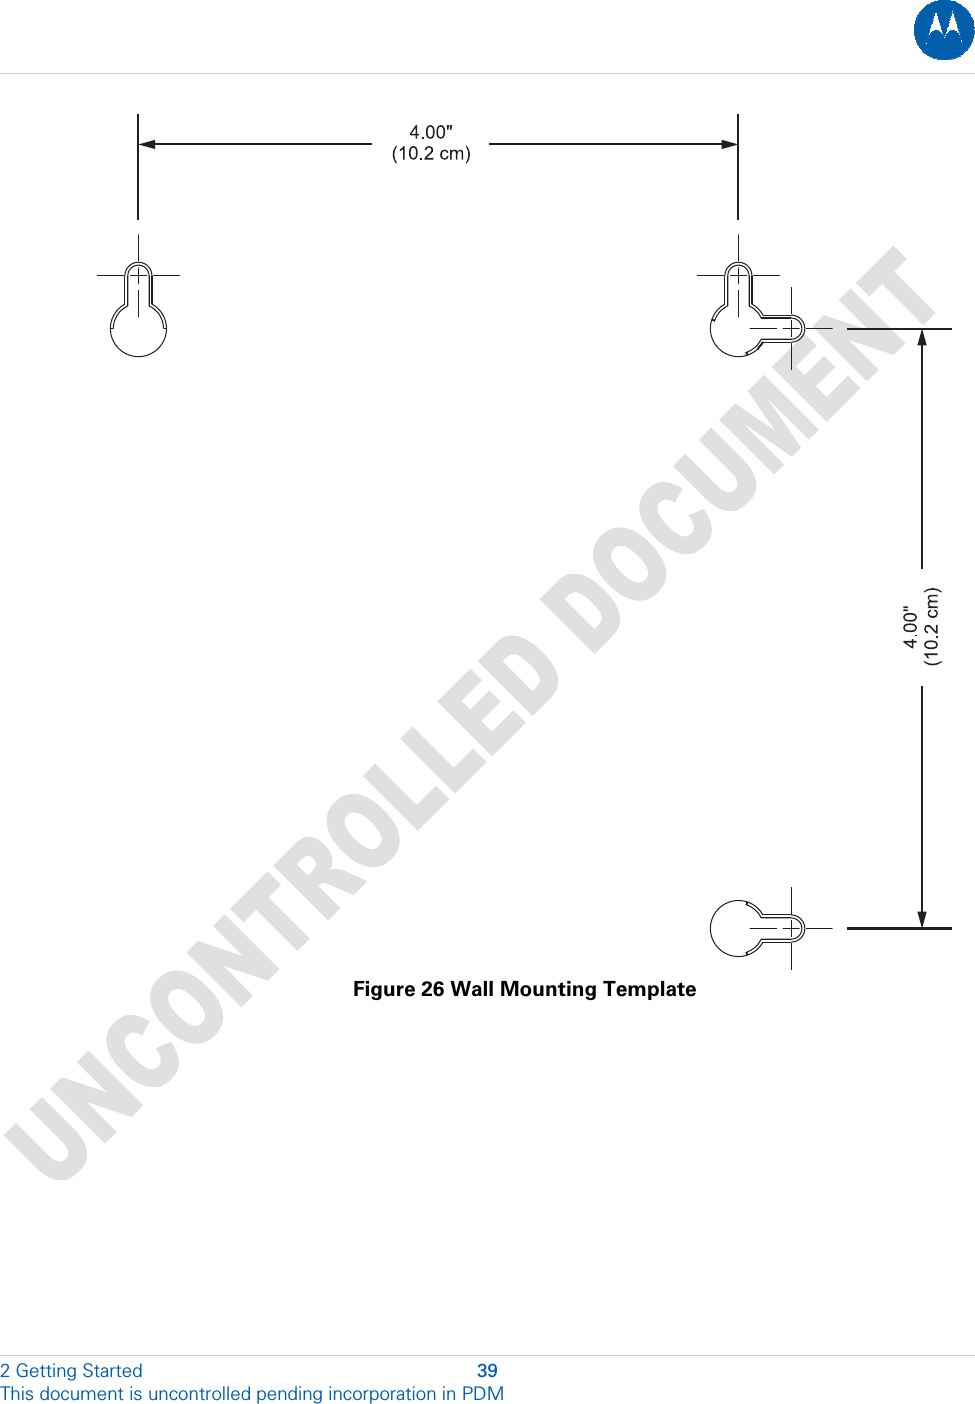   Figure 26 Wall Mounting Template  2 Getting Started  39 This document is uncontrolled pending incorporation in PDM  